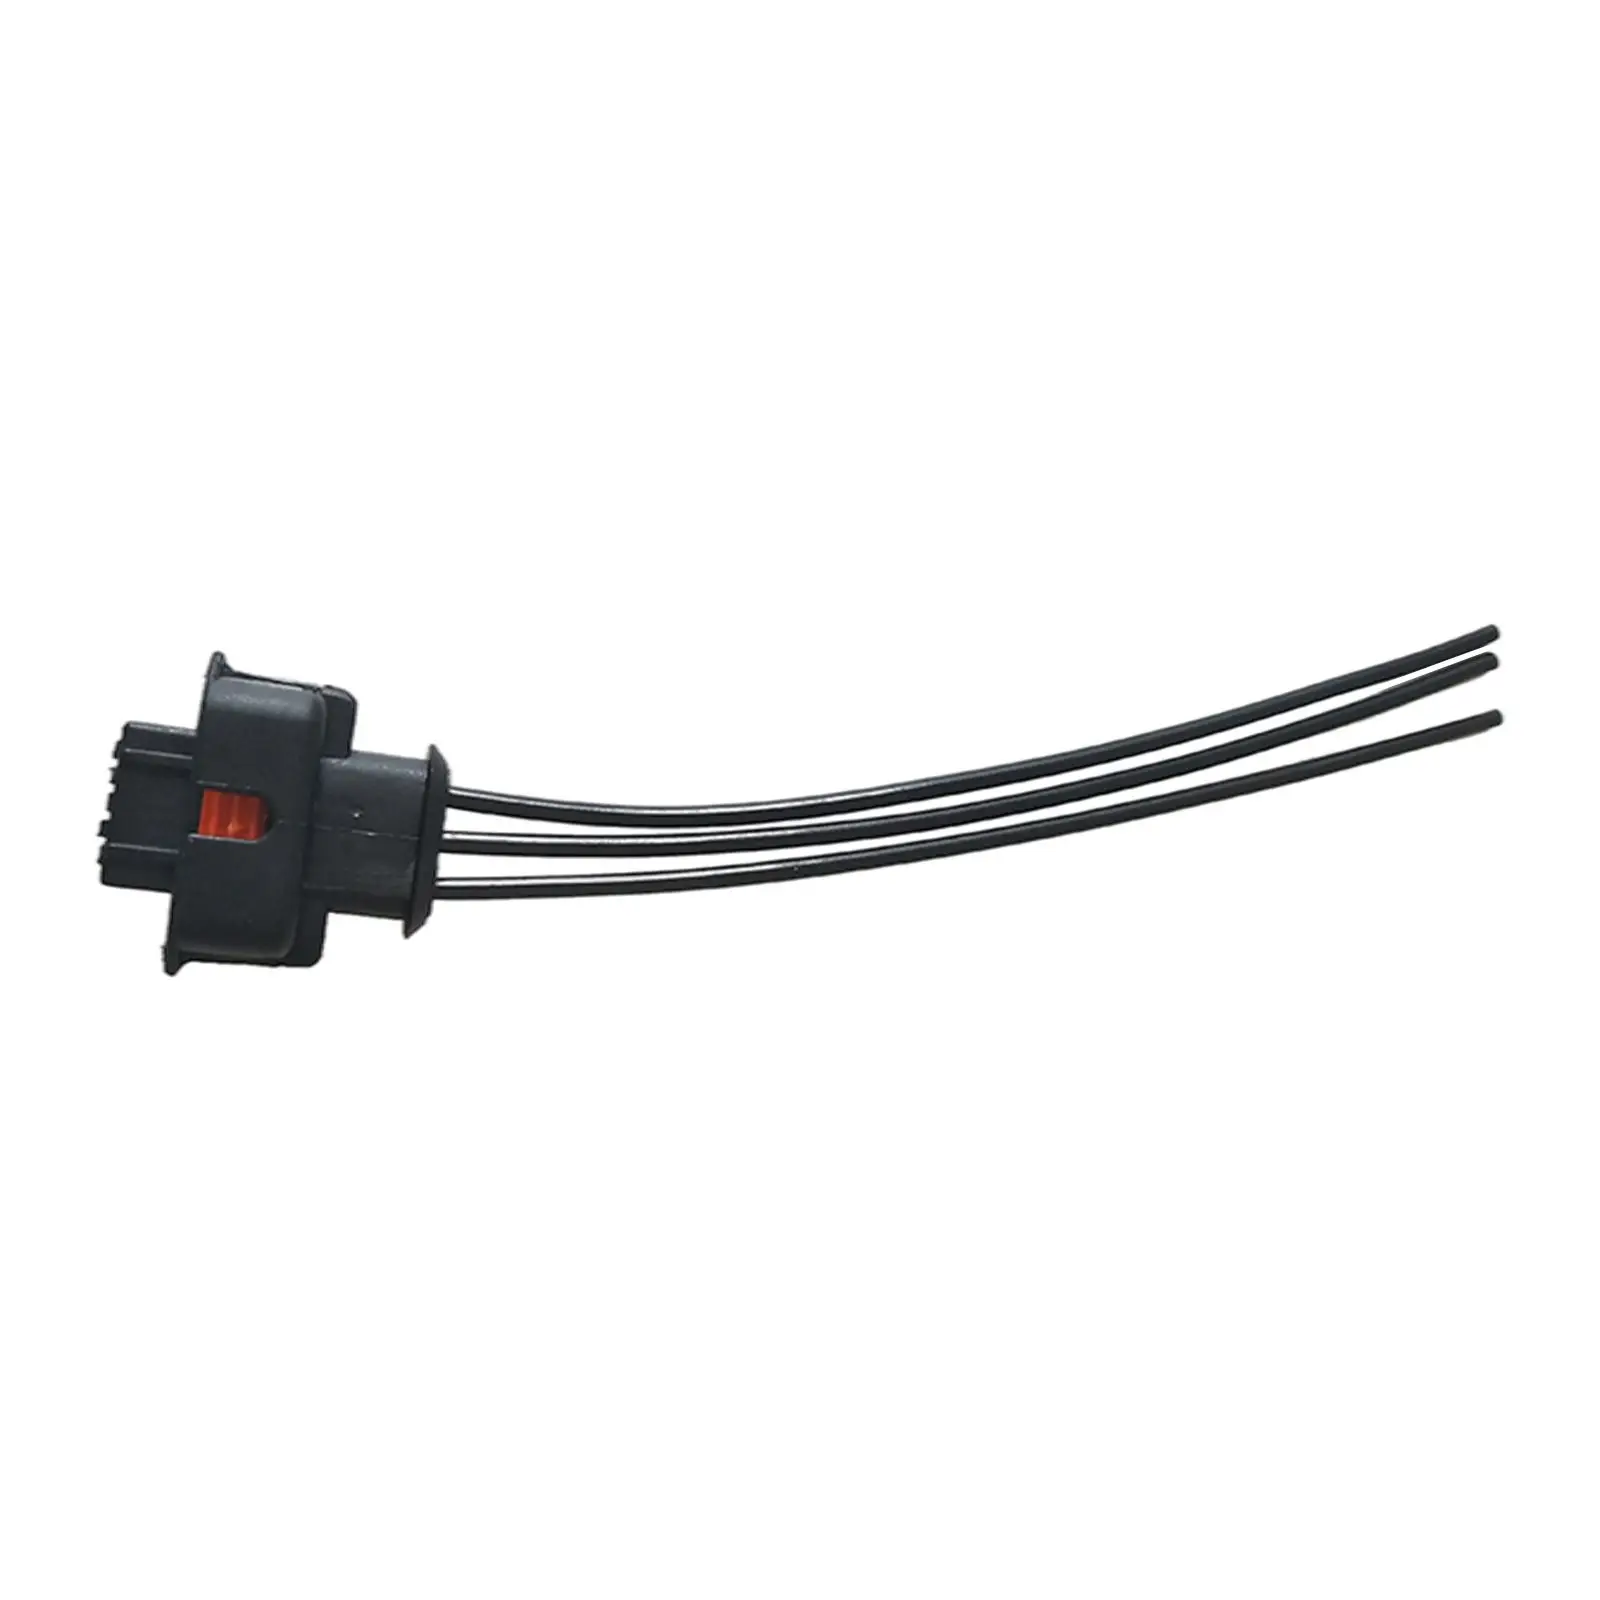 Electrical Connector ( Wire Harness) for Camshaft Position Sensor 5S1348 A0041536928 Fit for  S65 C55  